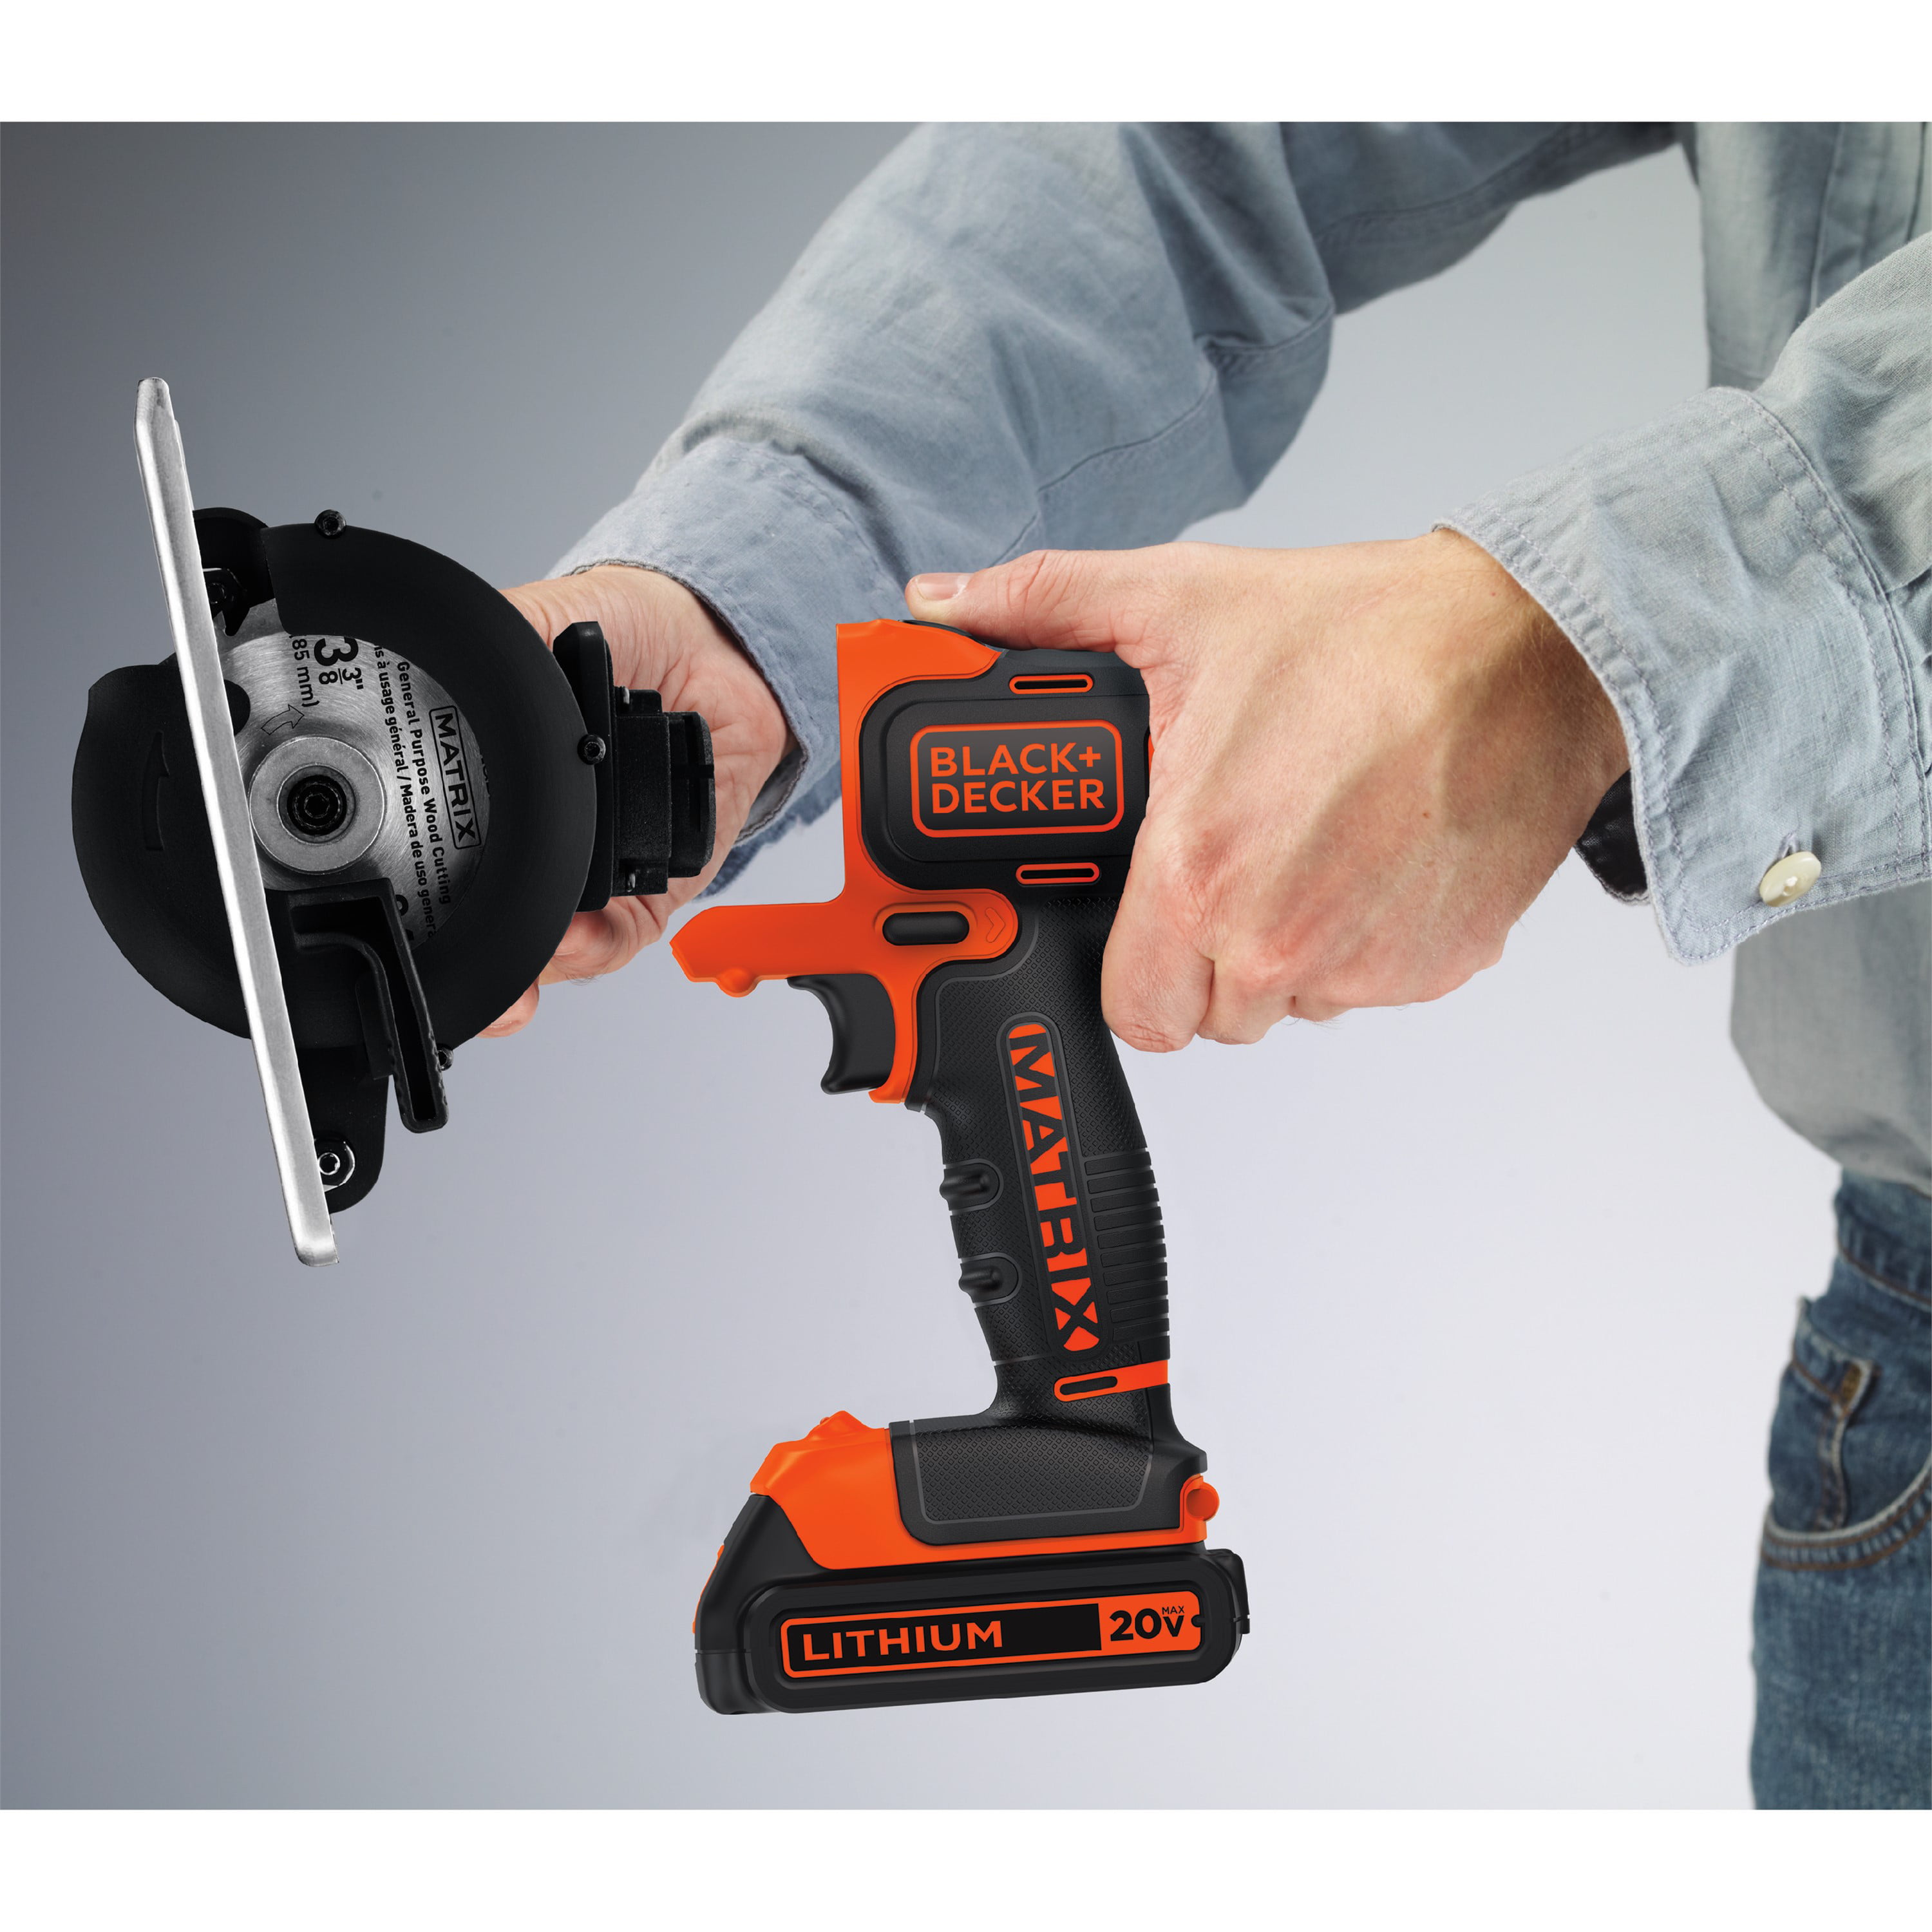 Stanley Black & Decker - Drill, saw, sand with one Black & Decker Matrix  Quick Connect System drill and its interchangeable attachments, you can do  it all